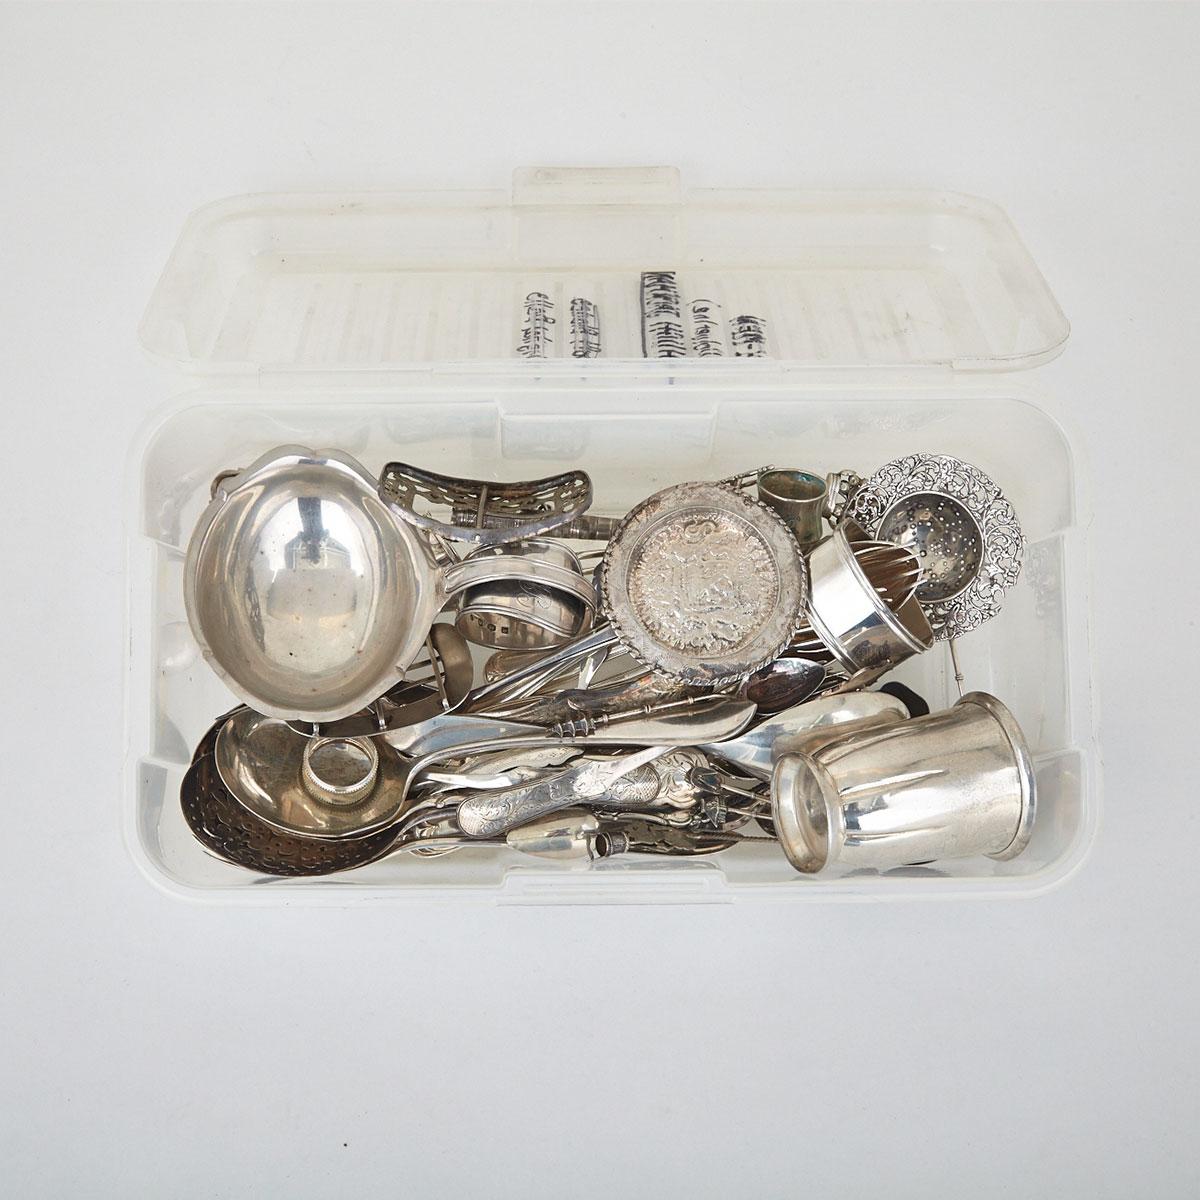 Grouped Lot of Dutch and Other Continental Silver, 19th-20th century